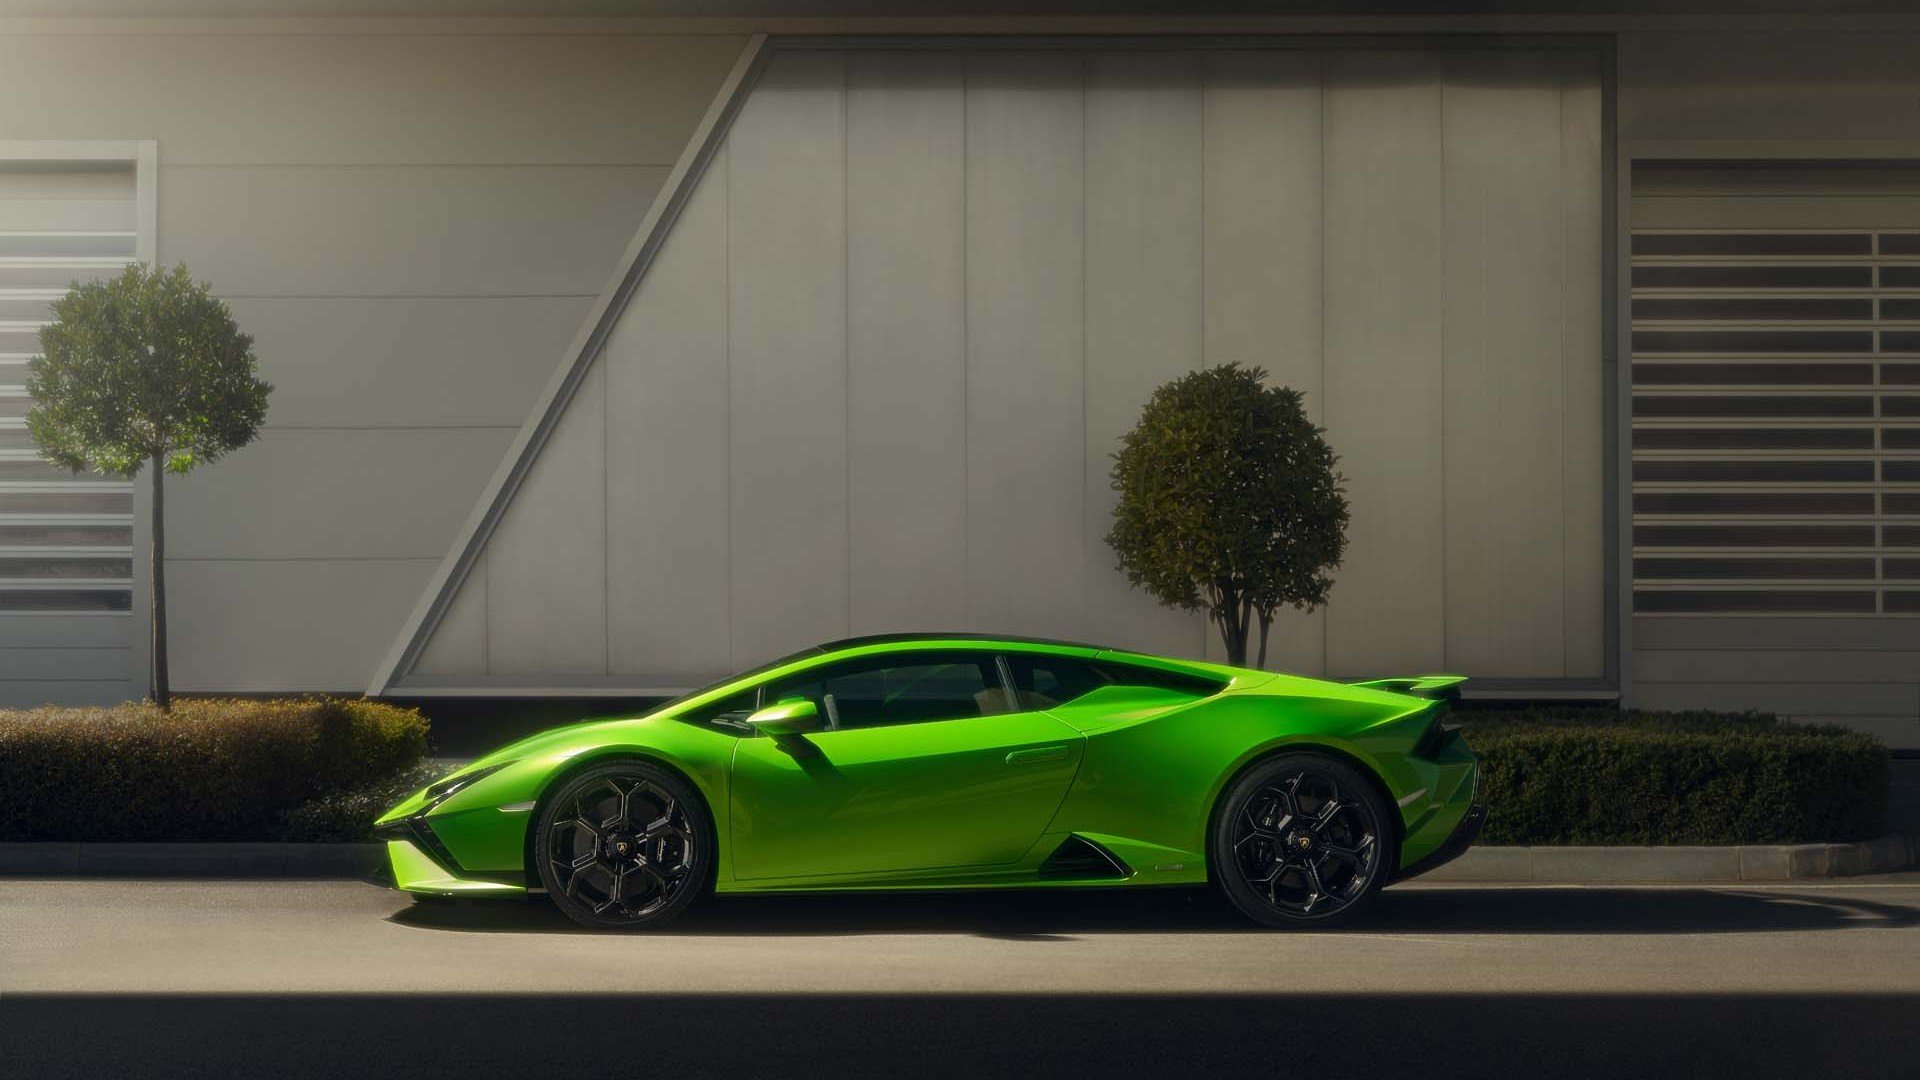 Preview: Lamborghini Huracan Tecnica combines power and poise